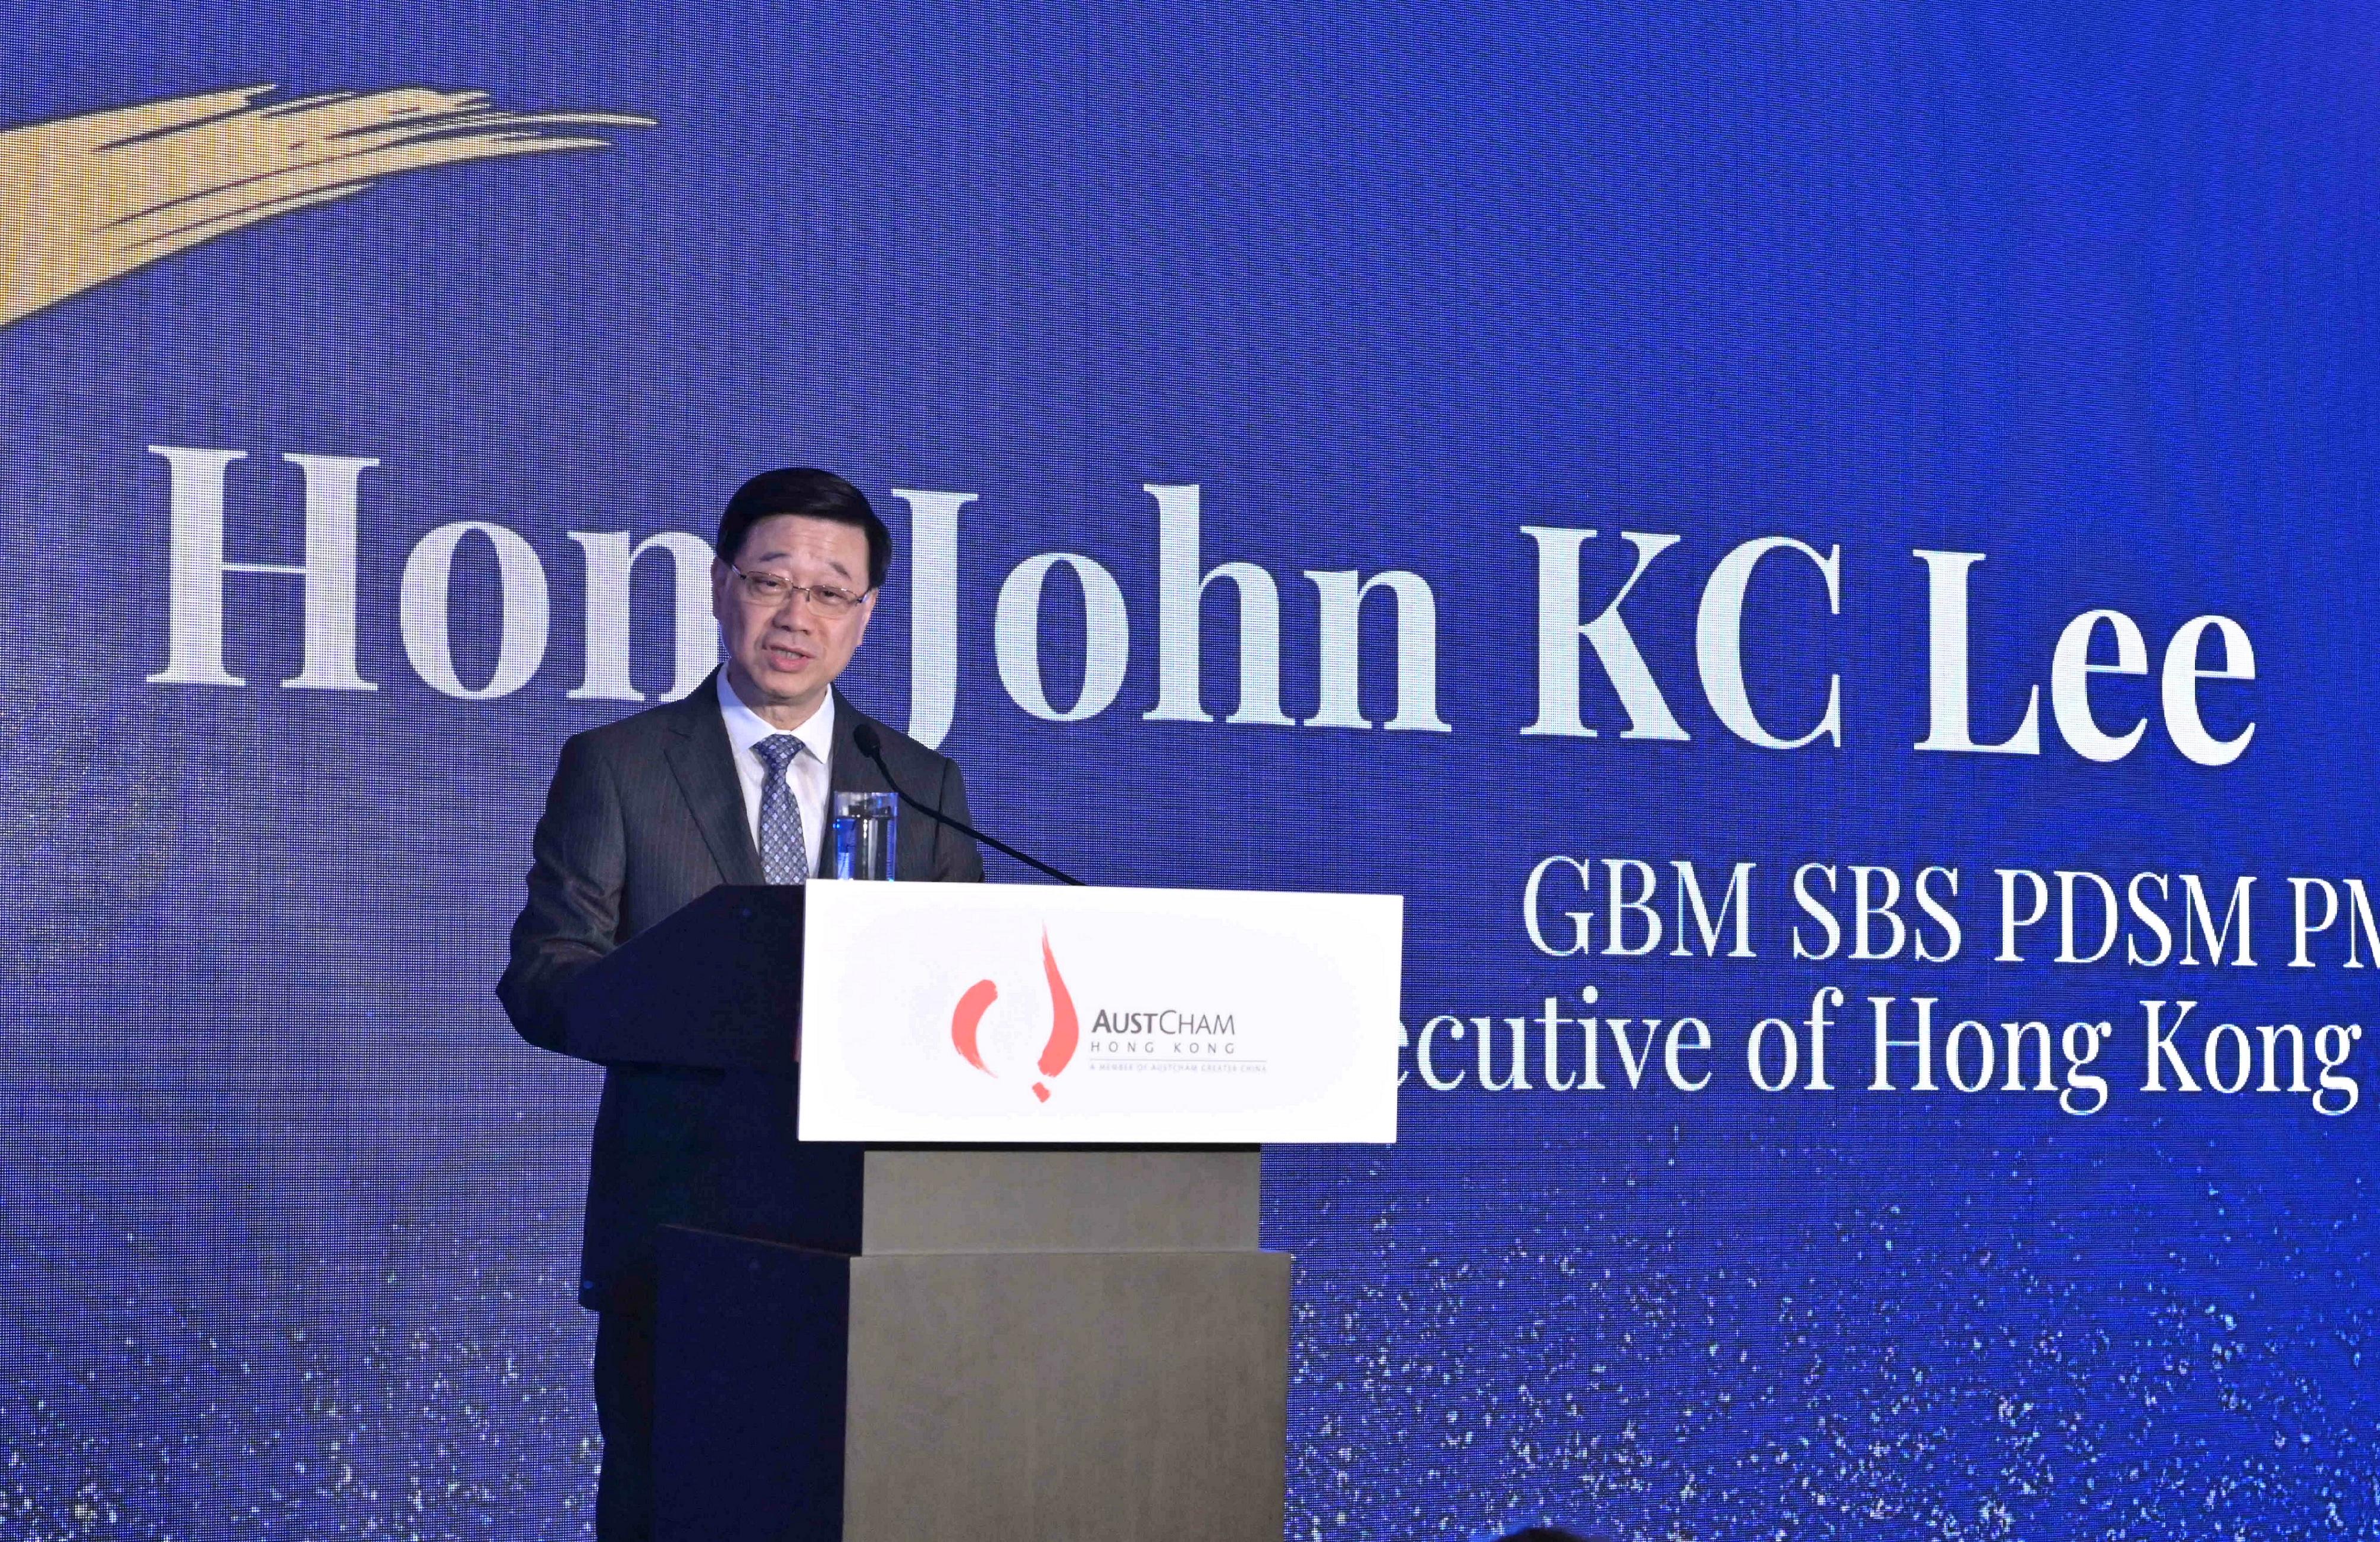 The Chief Executive, Mr John Lee, speaks at the Australian Chamber of Commerce in Hong Kong 36th Anniversary Dinner and Community Awards today (June 7).